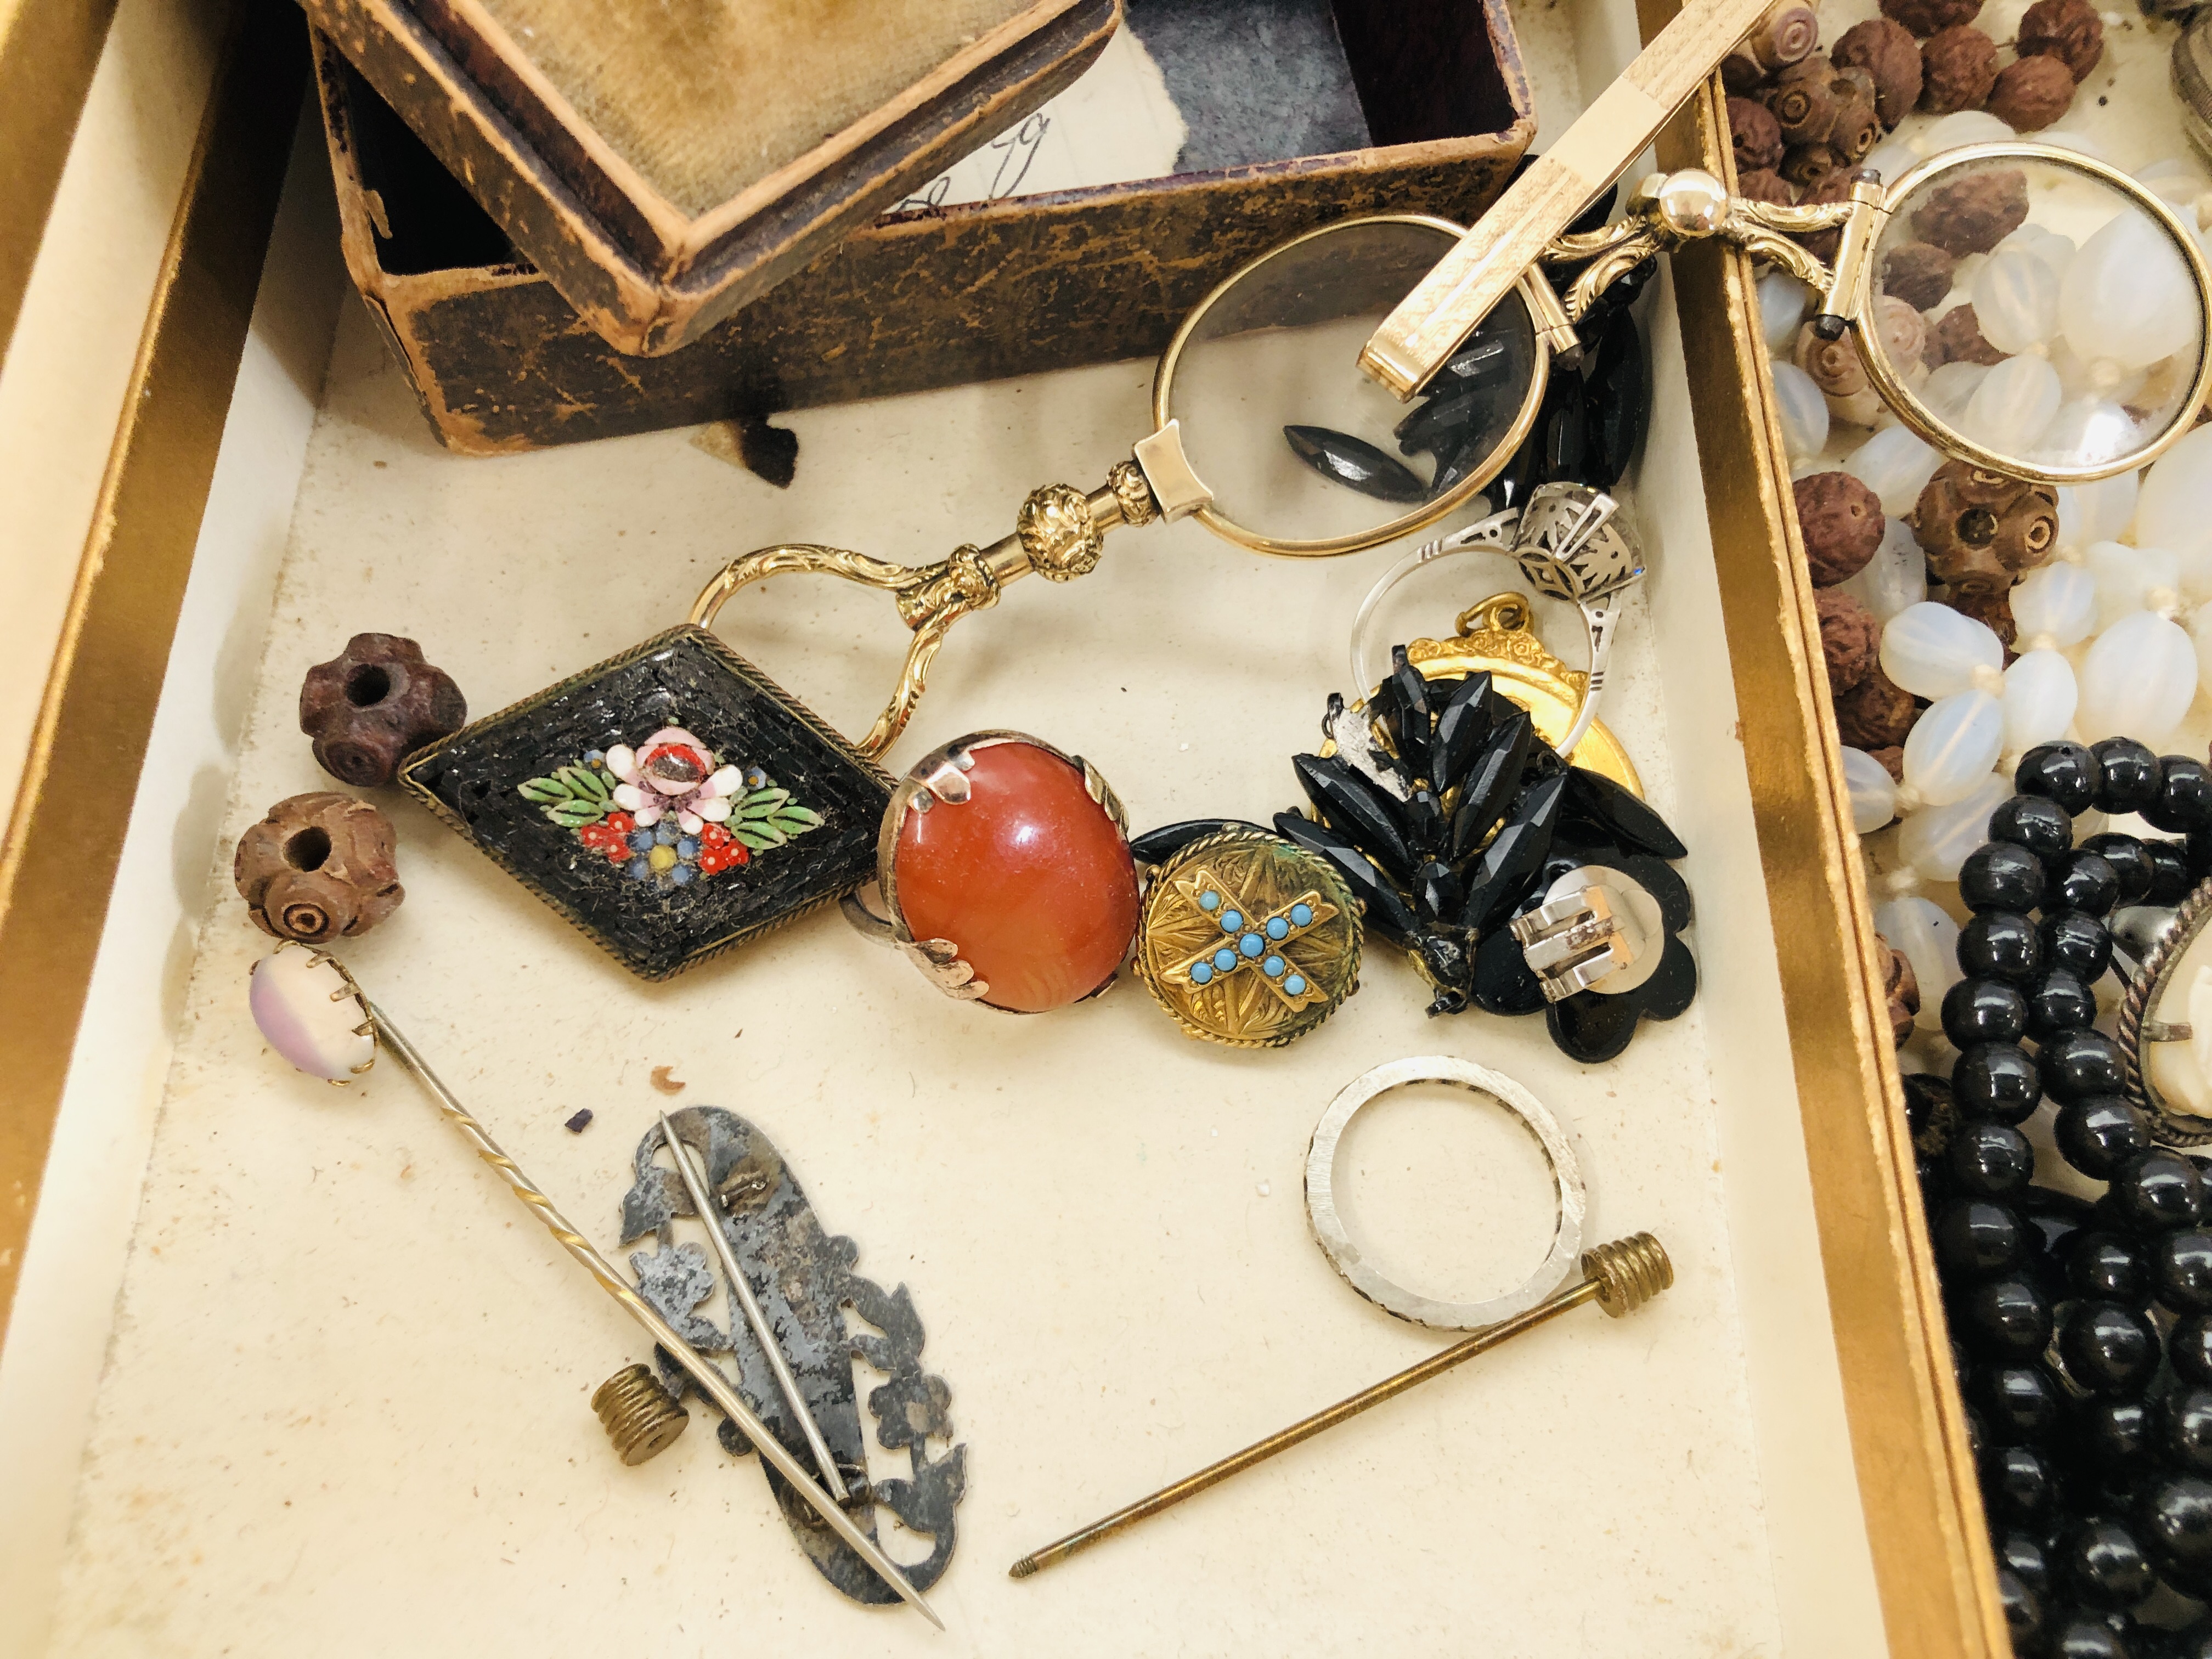 BOX OF VINTAGE COSTUME JEWELLERY TO INCLUDE CAMEO BROOCH, WATCH, LORGNETTE, RINGS, ETC. - Image 5 of 5